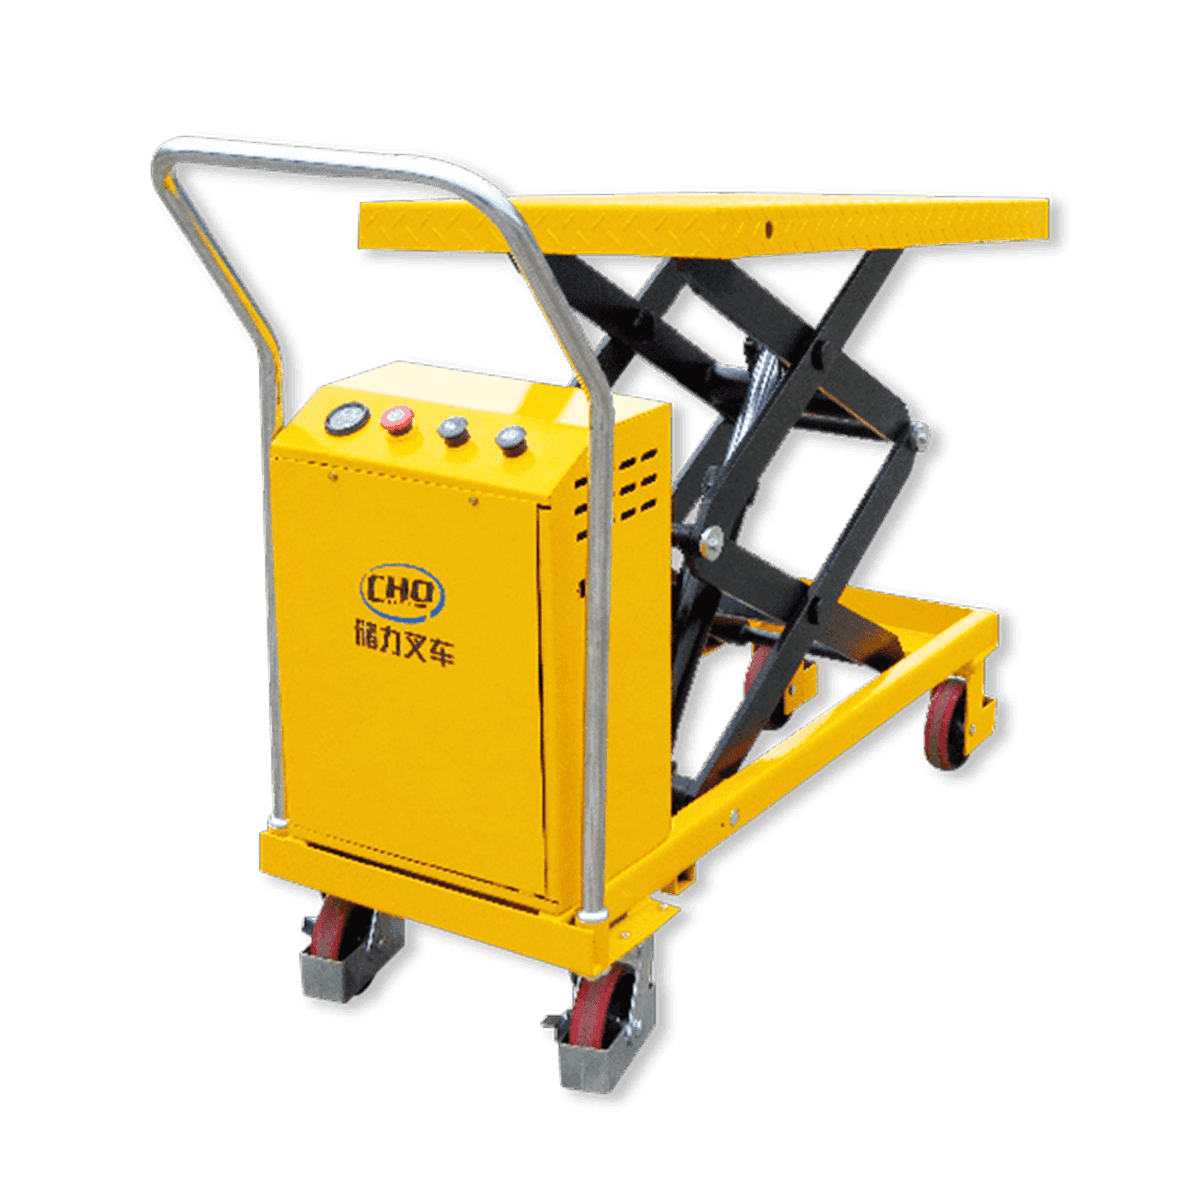 Can scissor lift tables be used in confined spaces or narrow aisles?